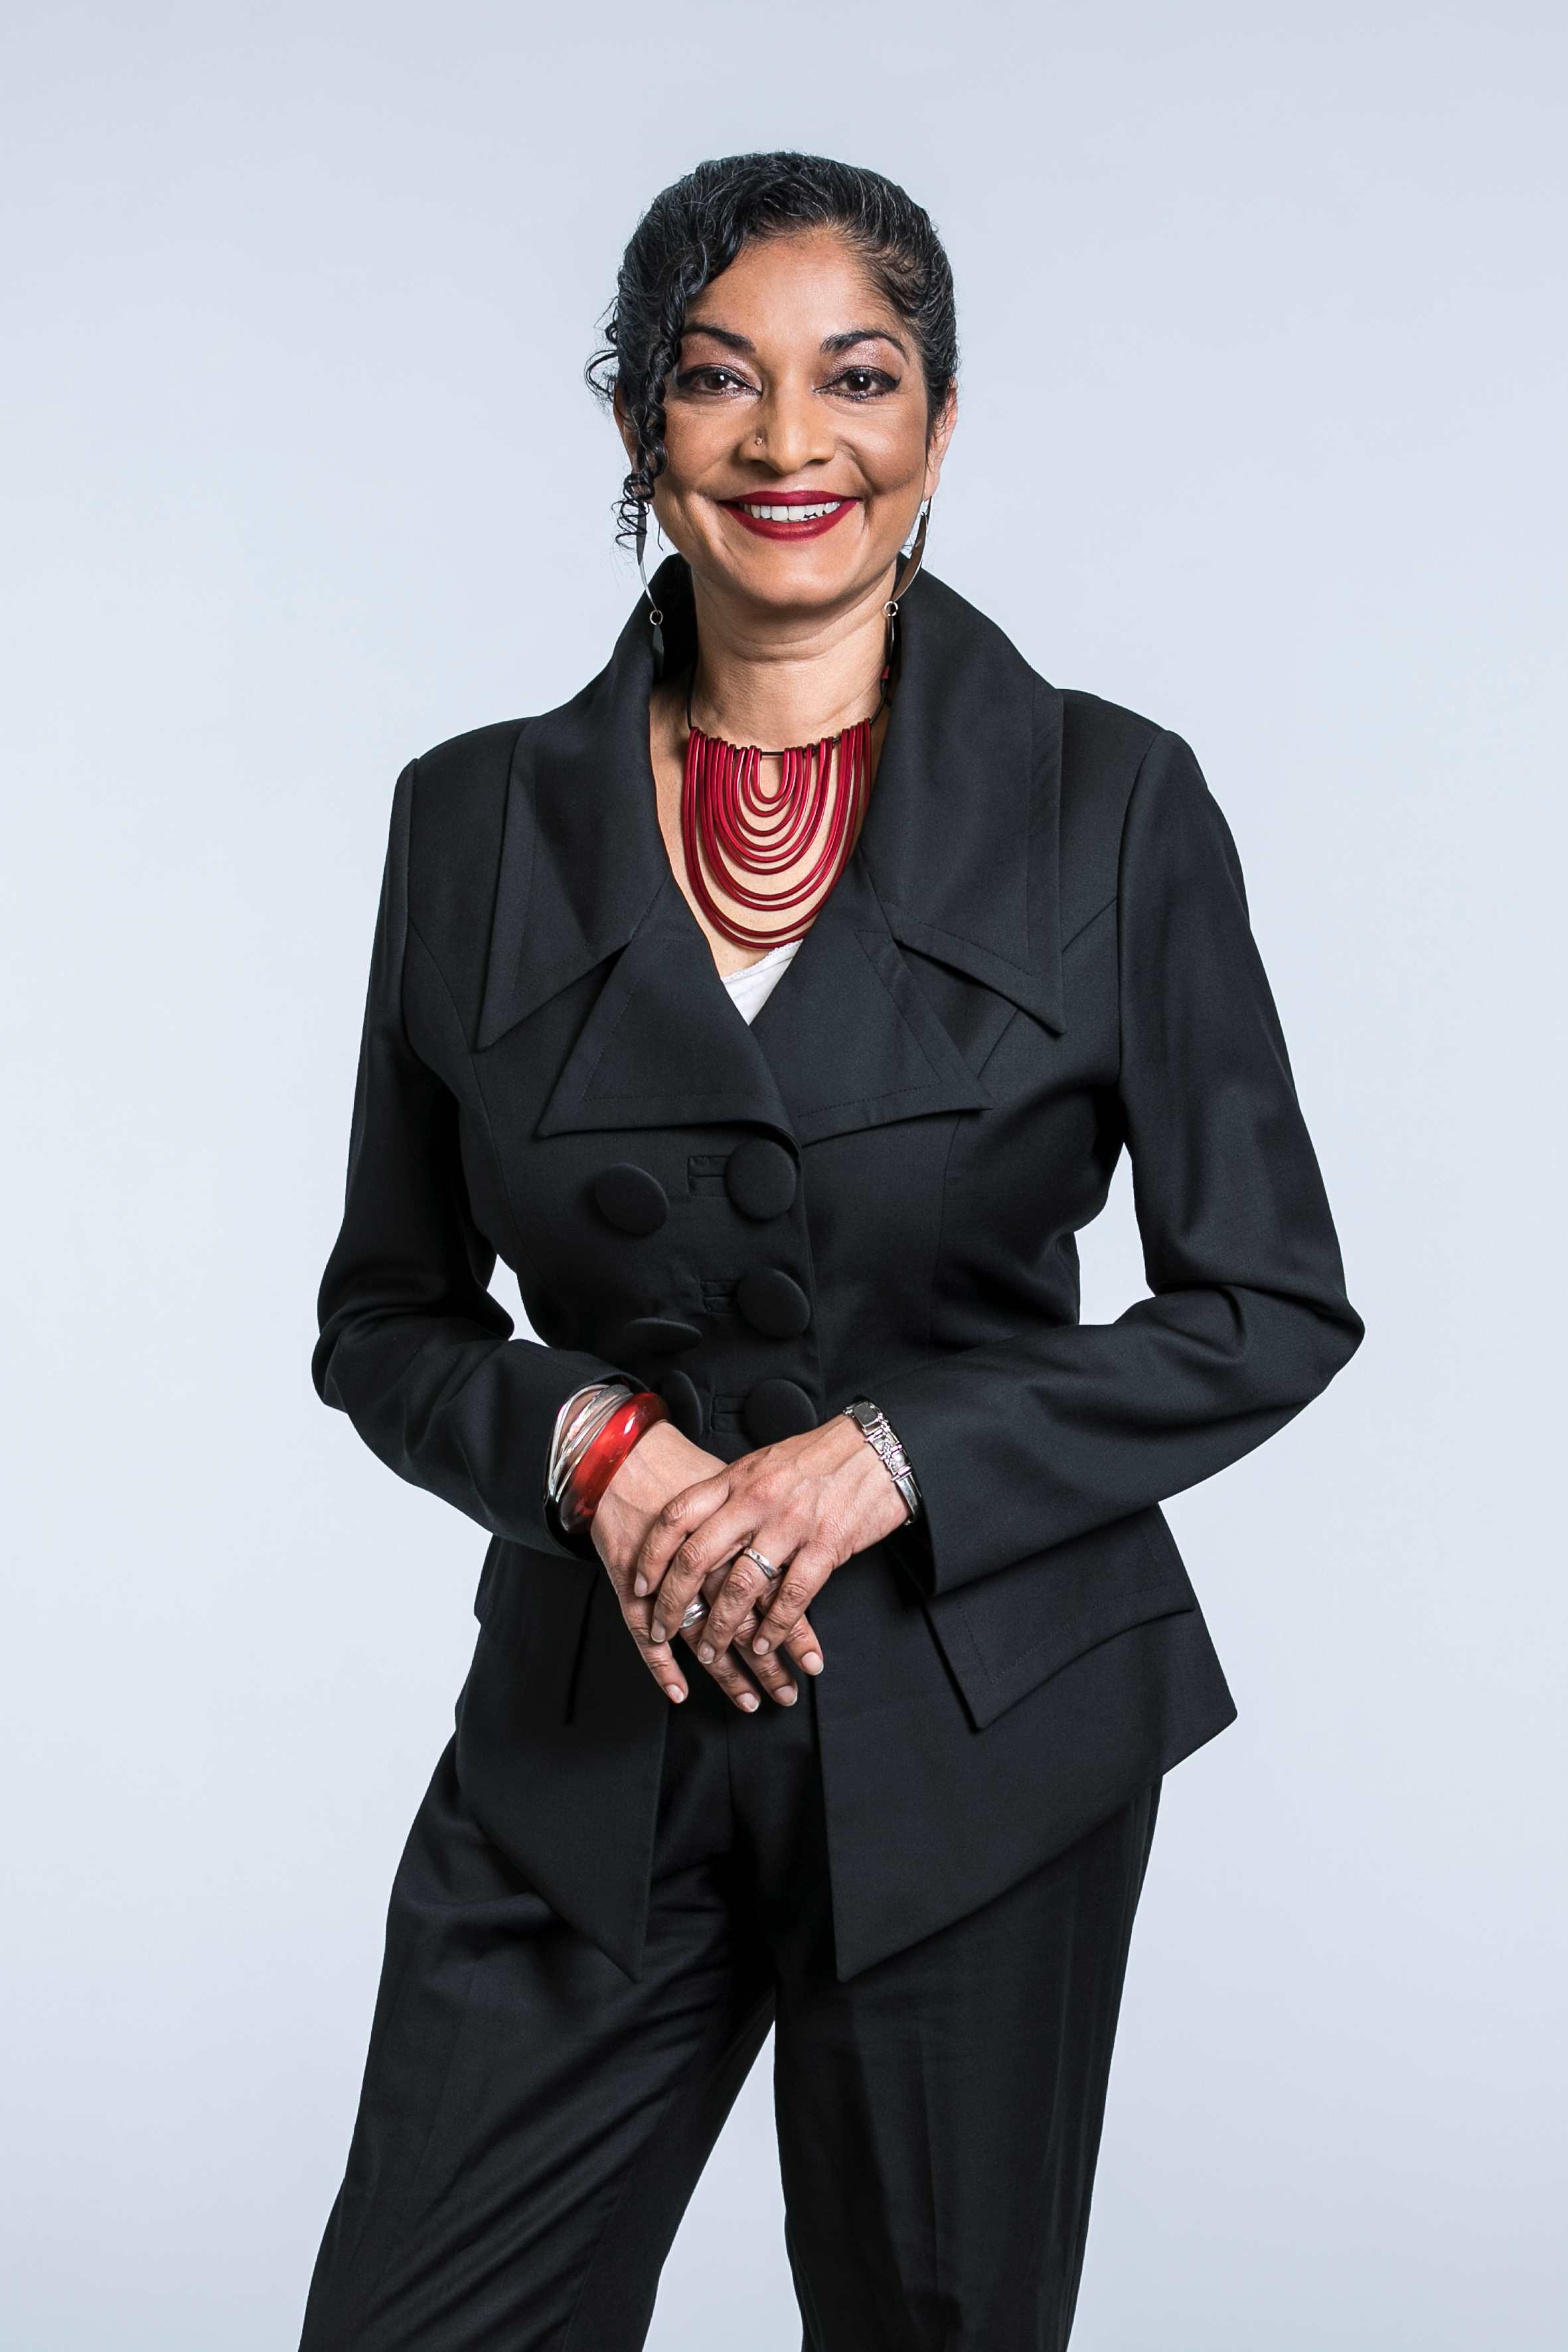 Padma is standing in front of the camera, smiling. She is wearing a black suit with a red statement necklace. Her black hair is tied back.